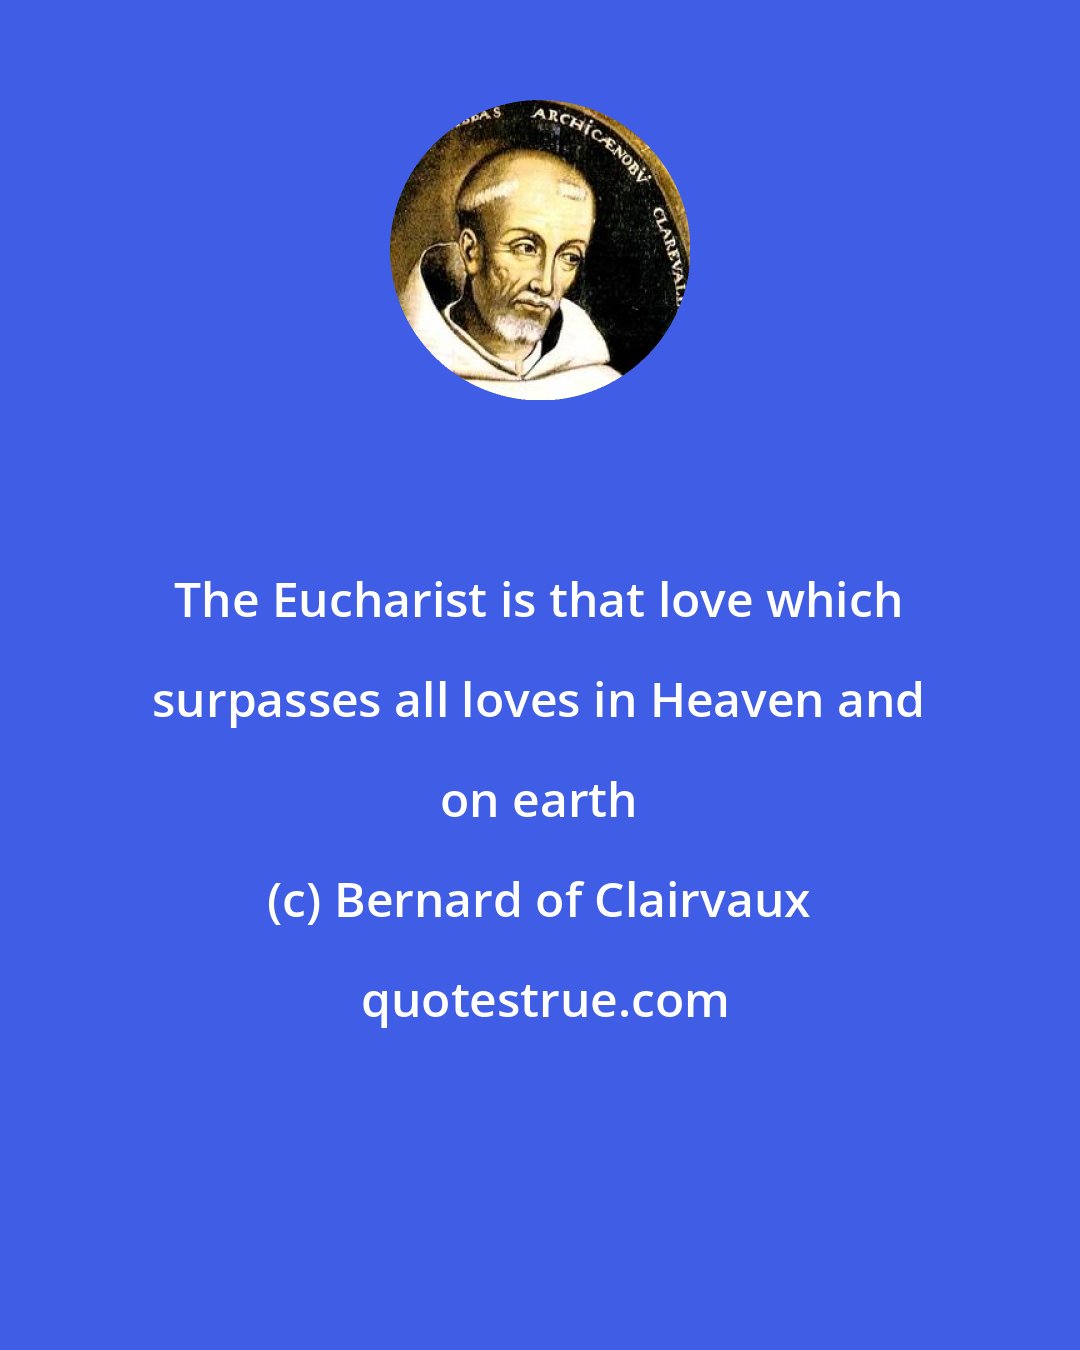 Bernard of Clairvaux: The Eucharist is that love which surpasses all loves in Heaven and on earth